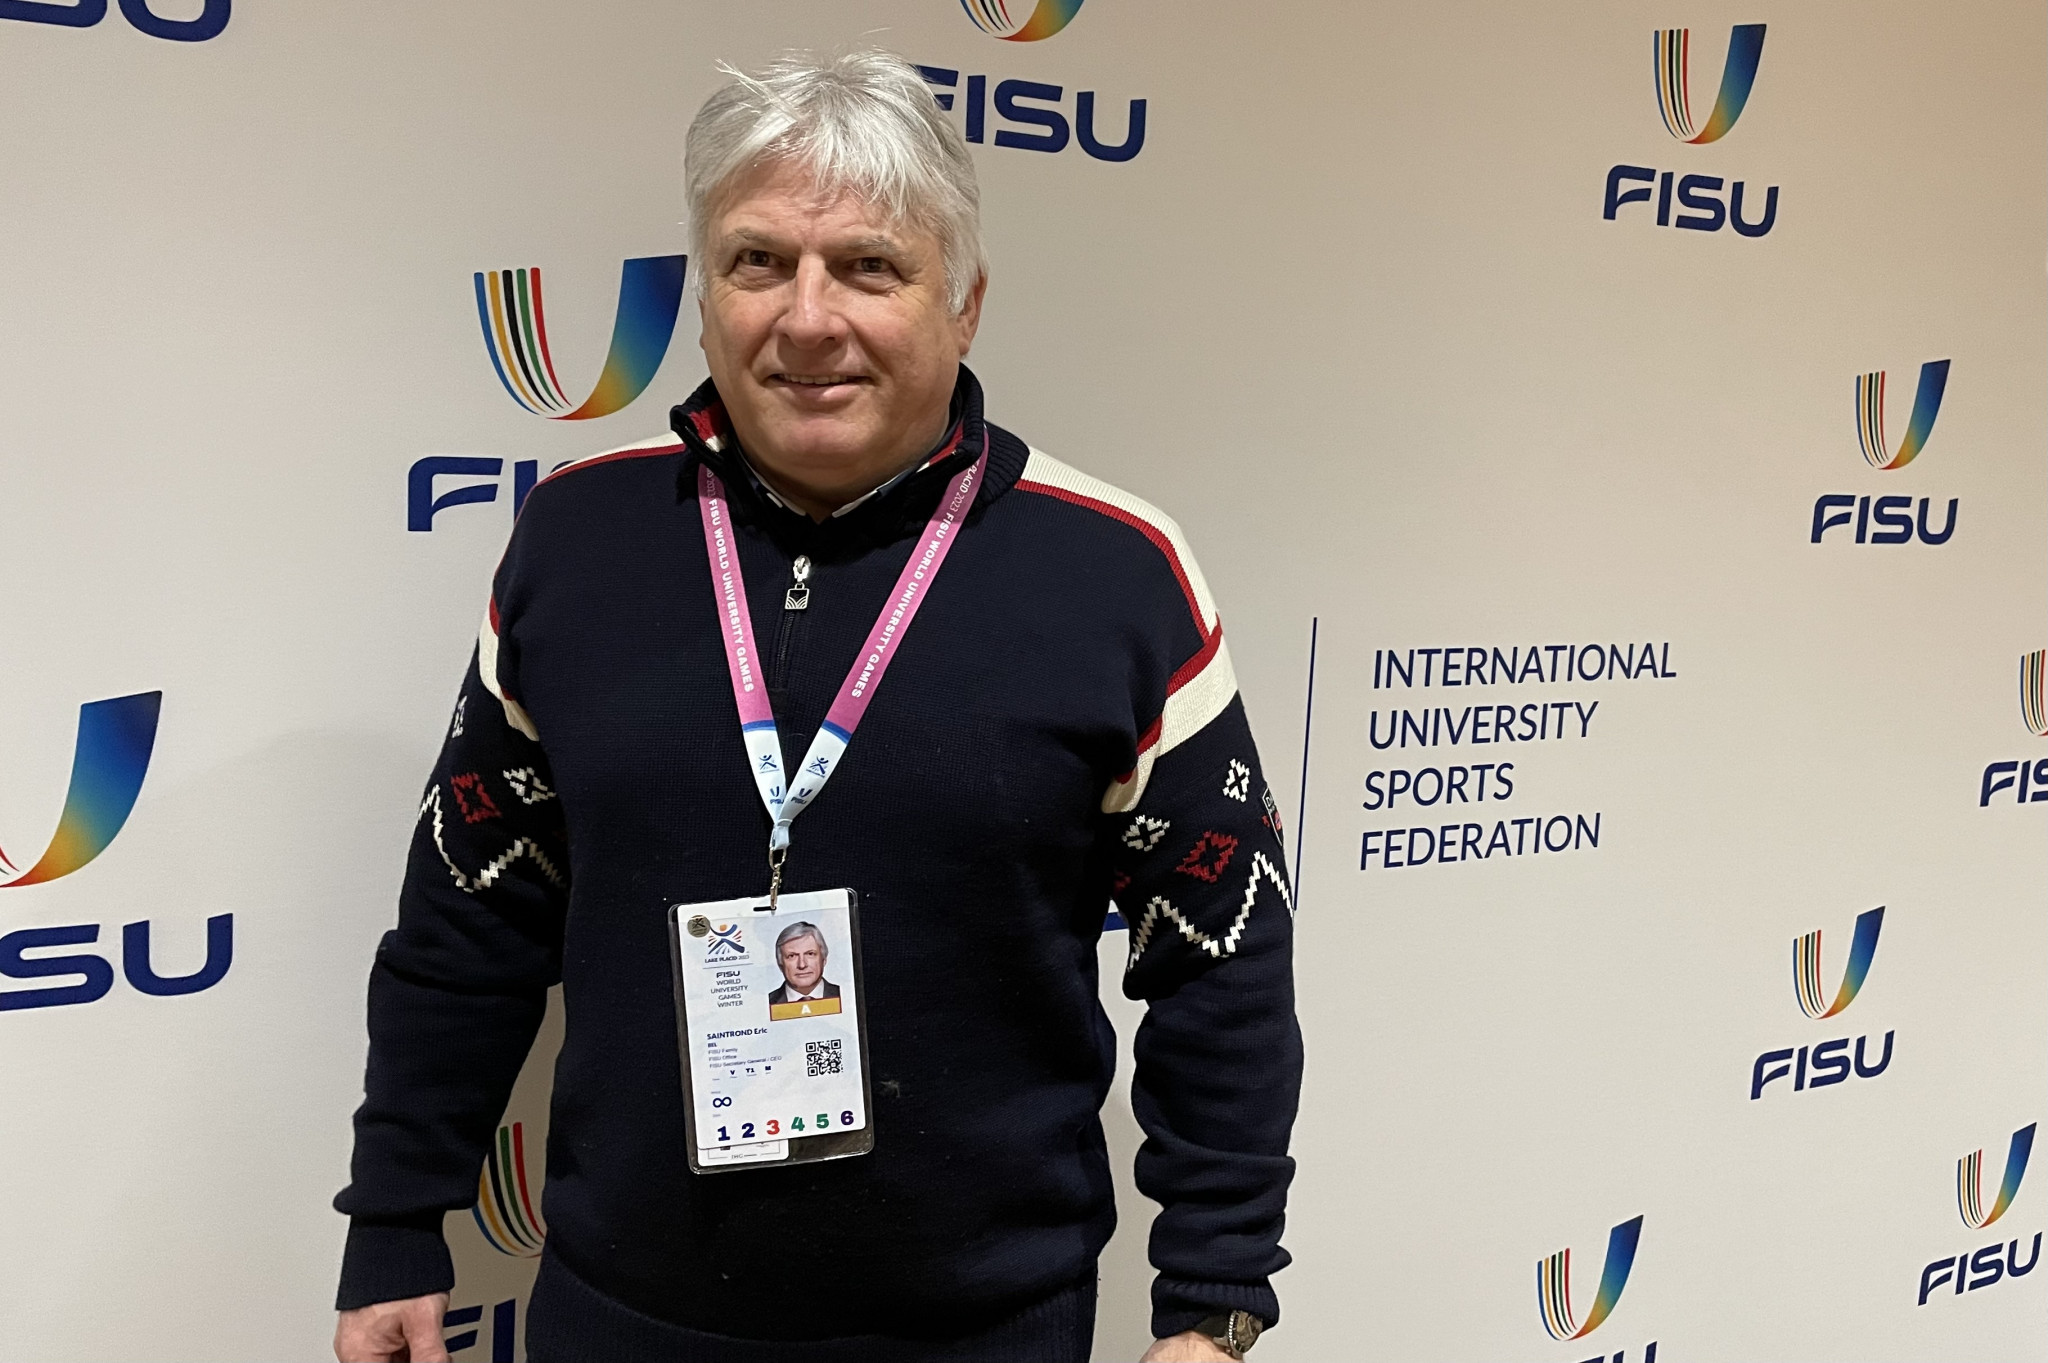 Exclusive: FISU Executive Committee aiming to increase terms by two years